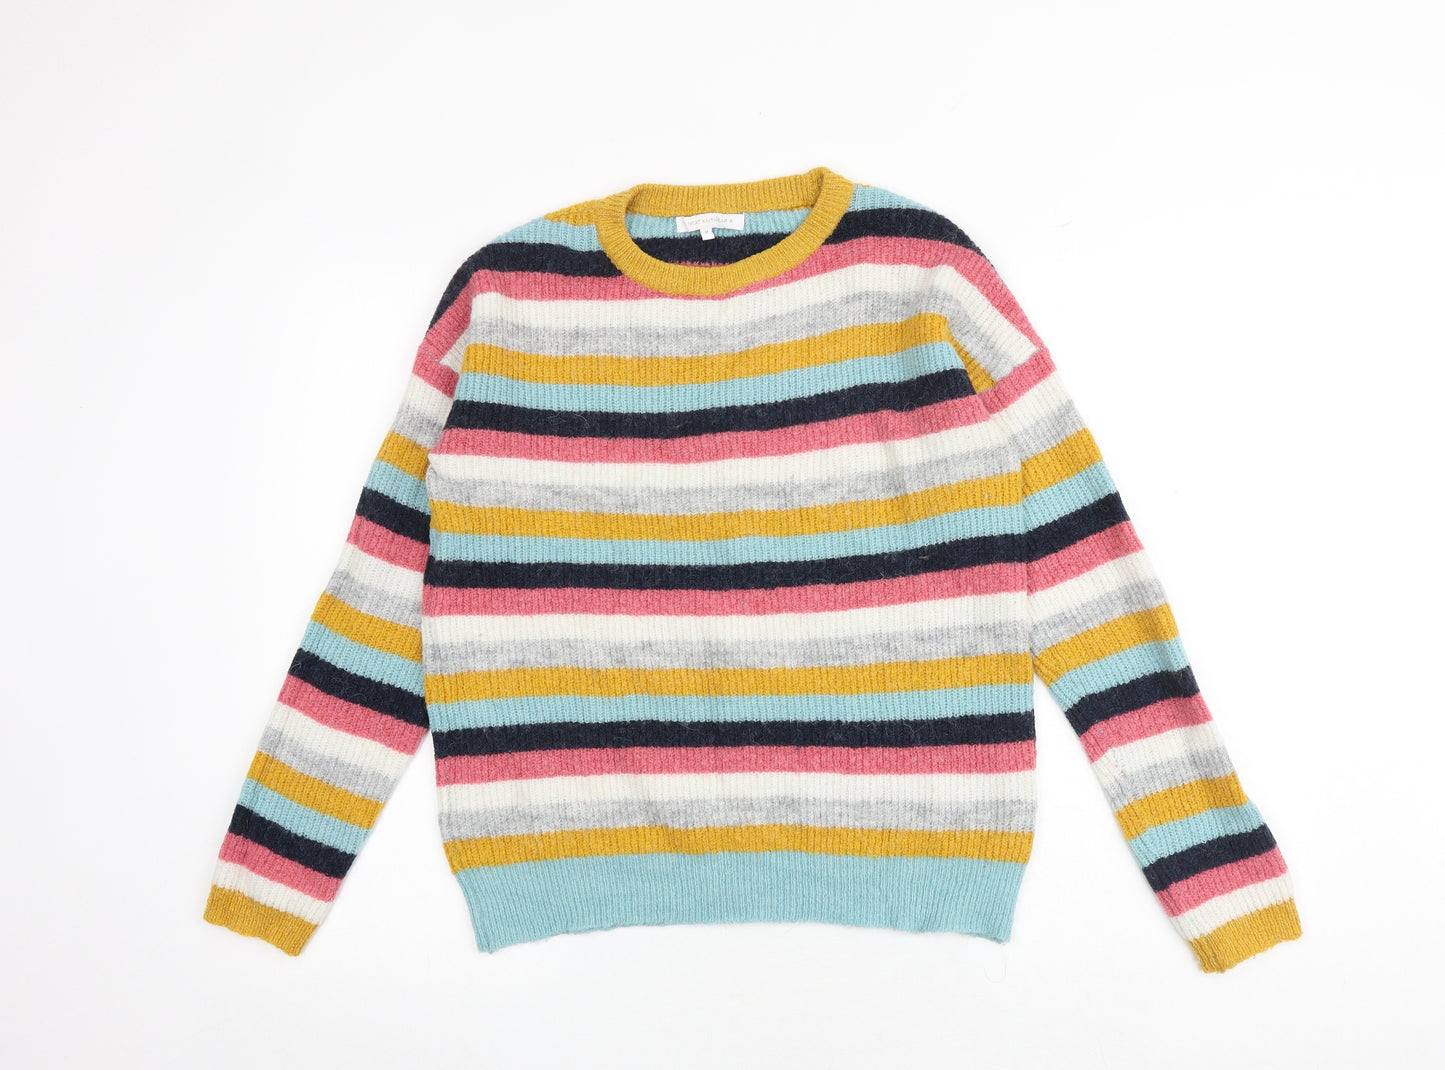 NEXT Womens Multicoloured Round Neck Striped Acrylic Pullover Jumper Size M